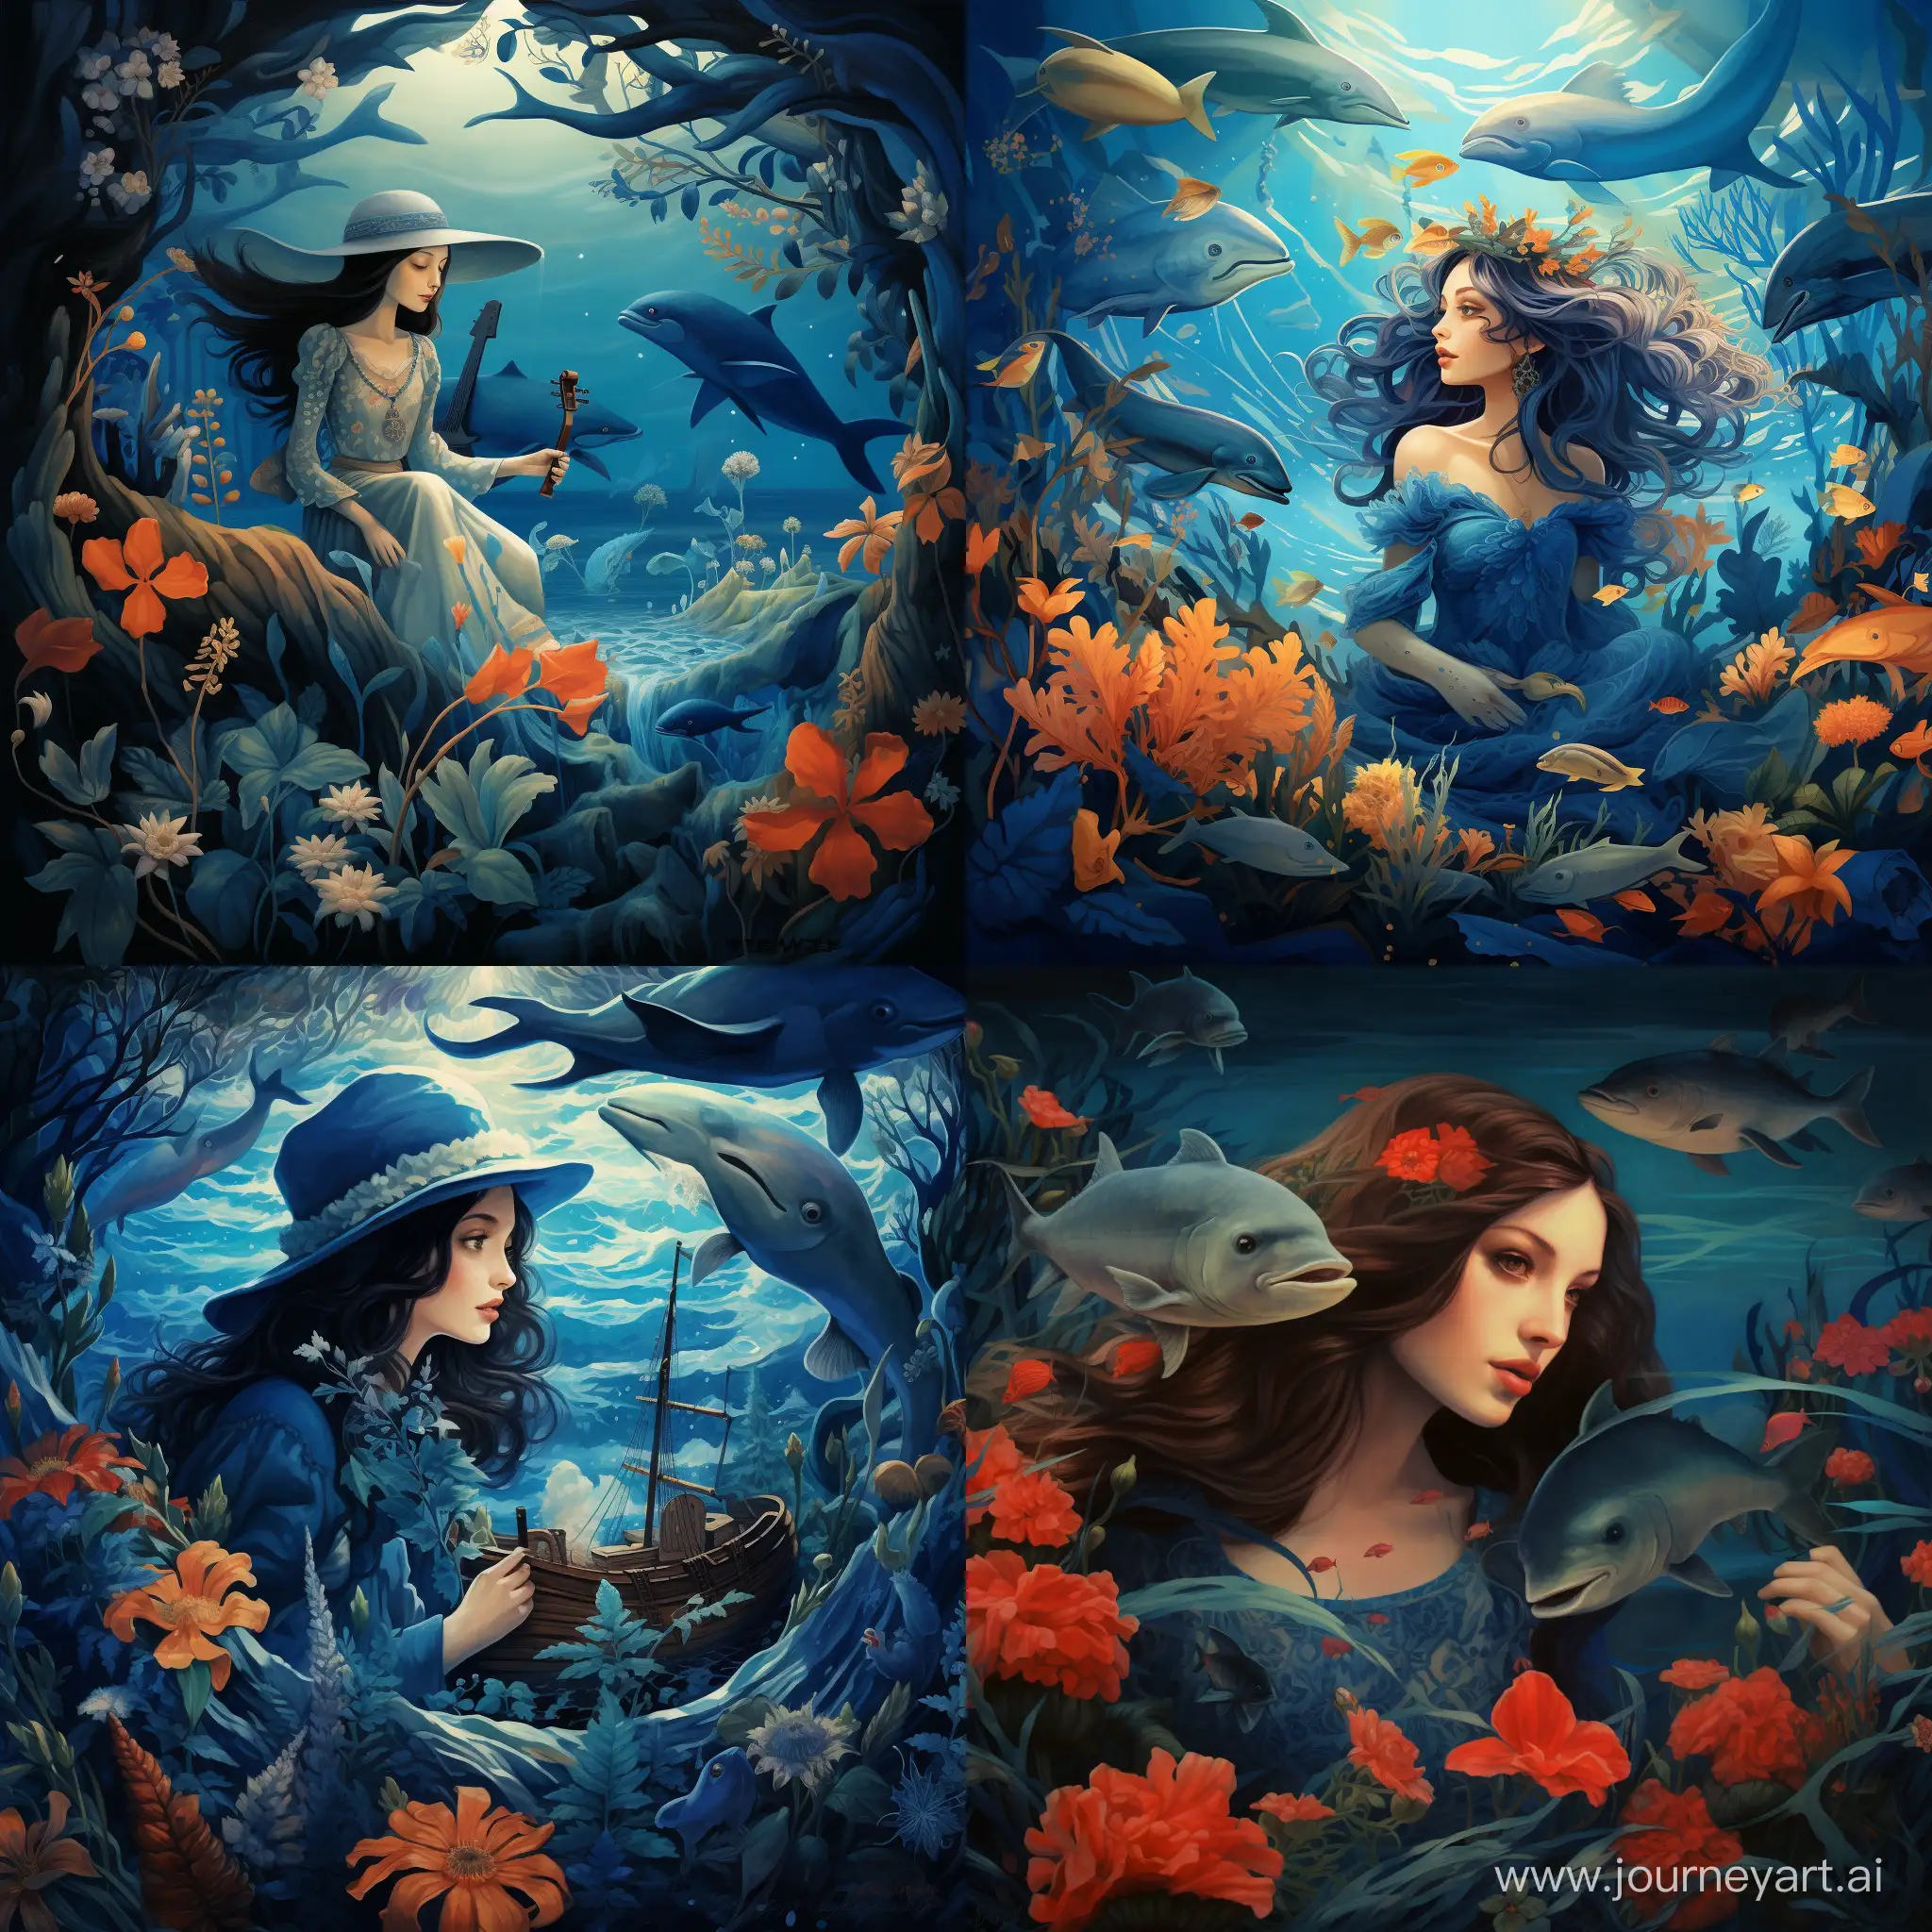 Portugueses, forest, sea, sea monsters, pirates, woman,  flowers, dolphins, bue, old stories, ilustration , discovery a new world inside her